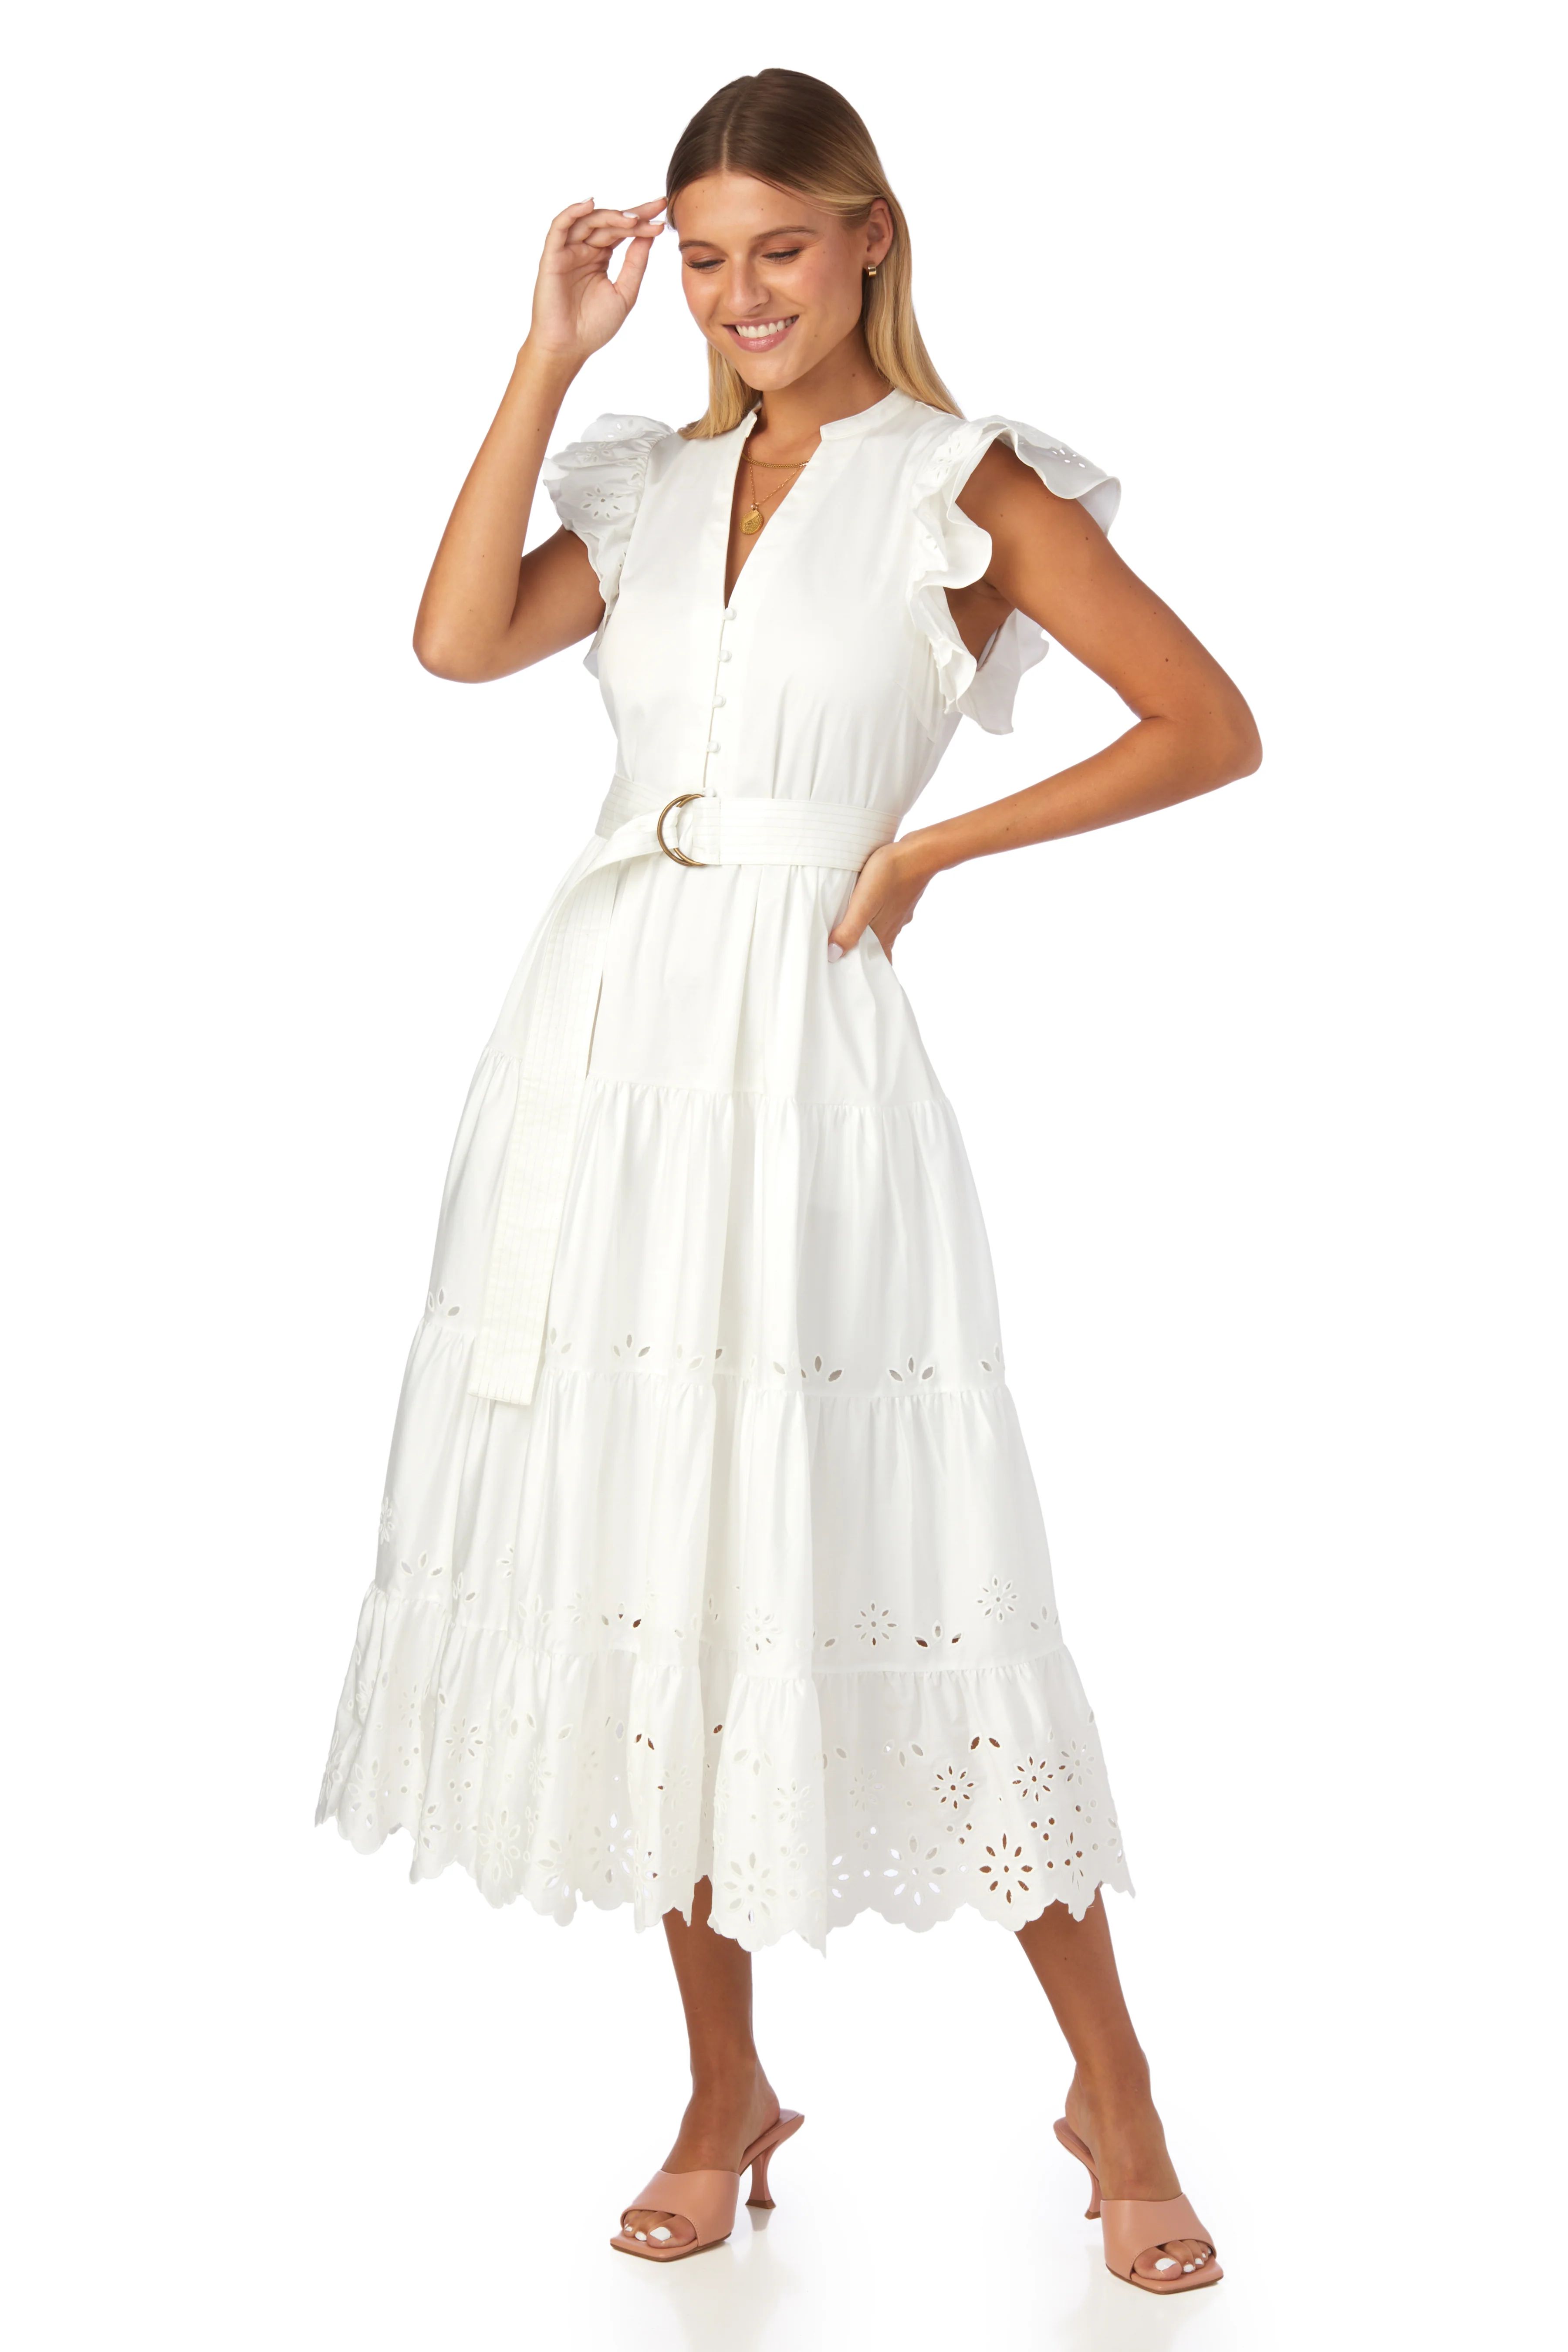 Kemble Dress in White - CROSBY by Mollie Burch | CROSBY by Mollie Burch